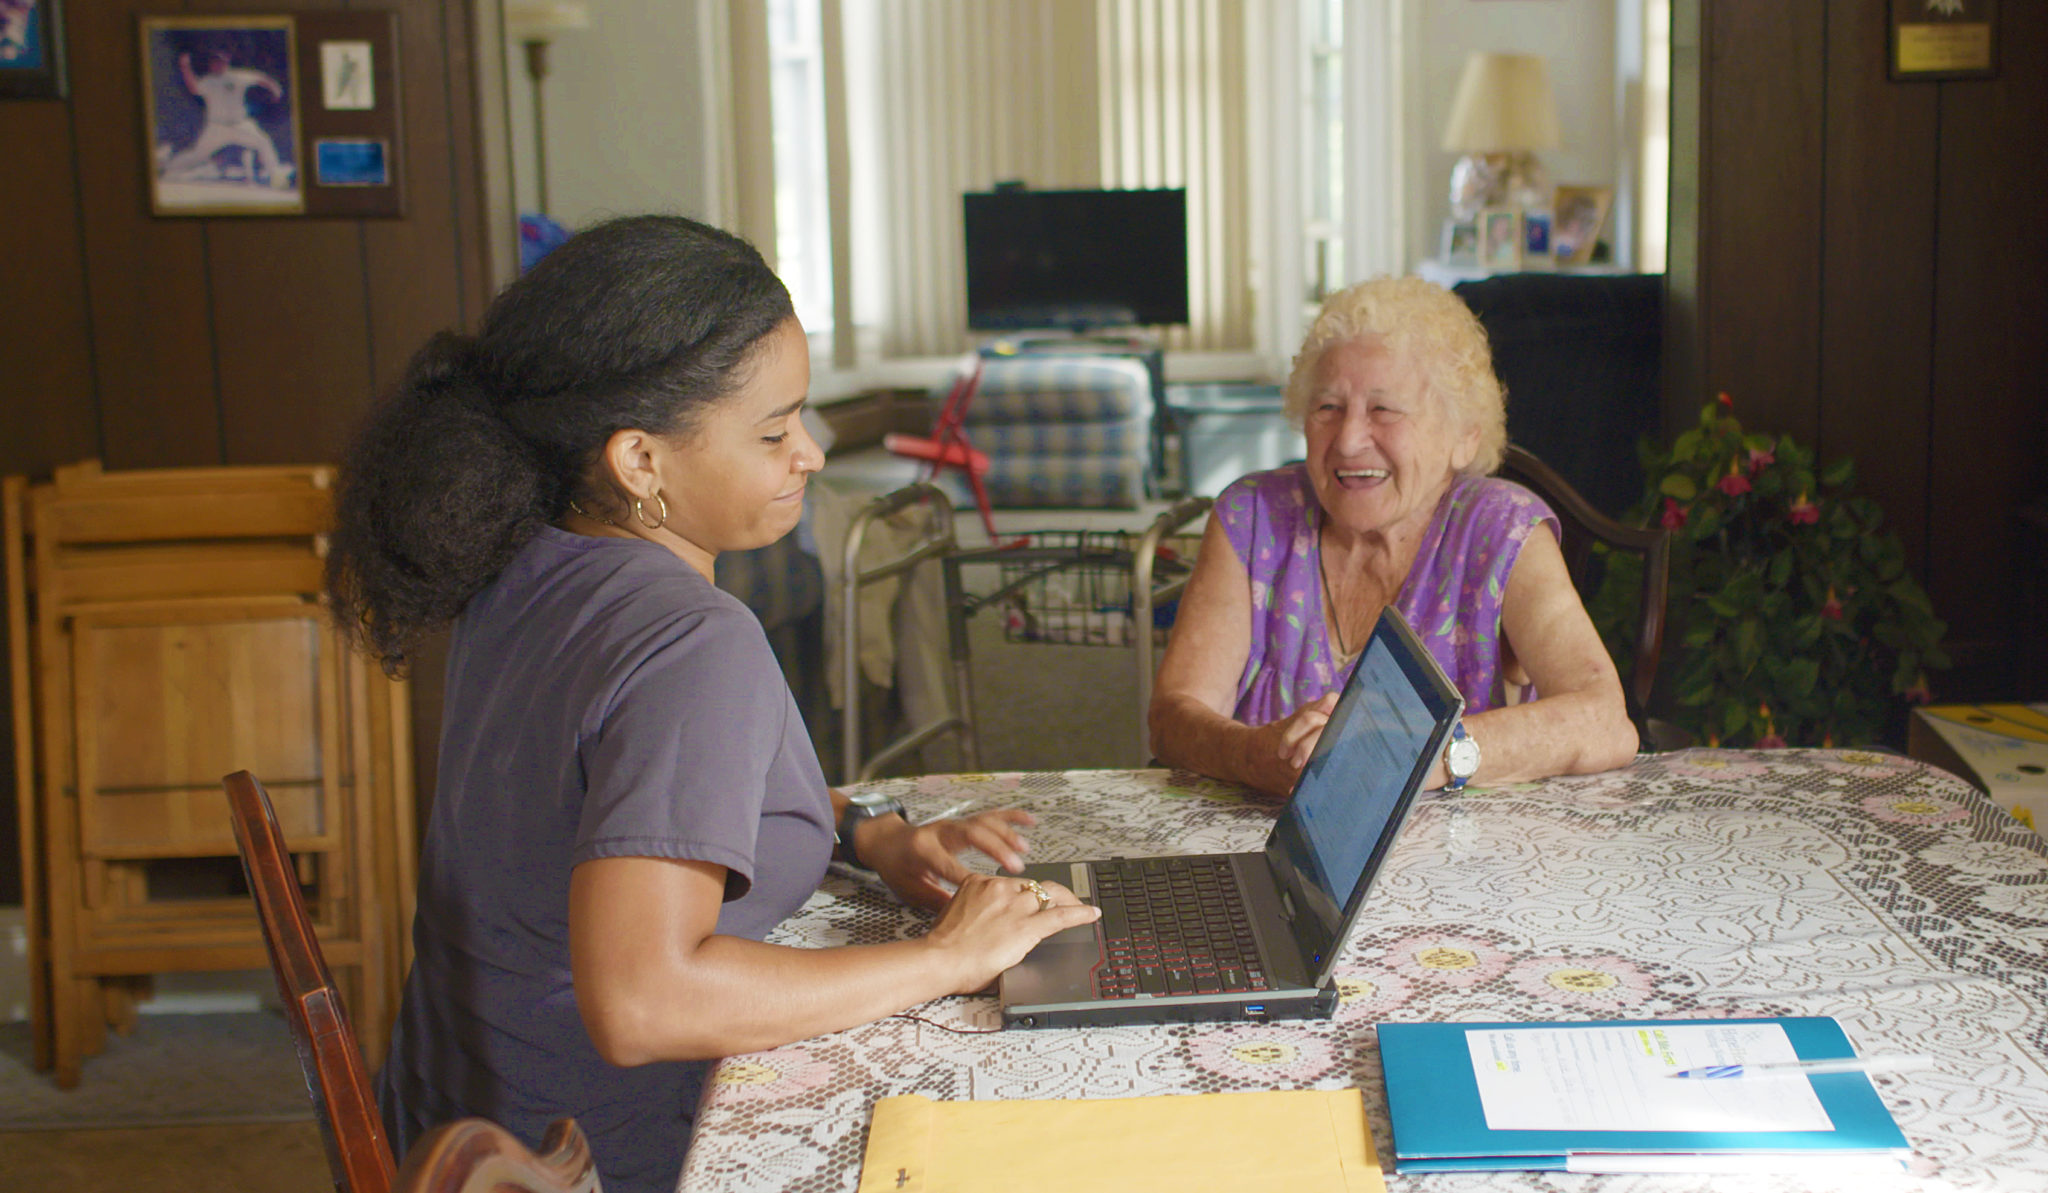 Home care nurse sitting at table with patient while updating the patients chart on a laptop